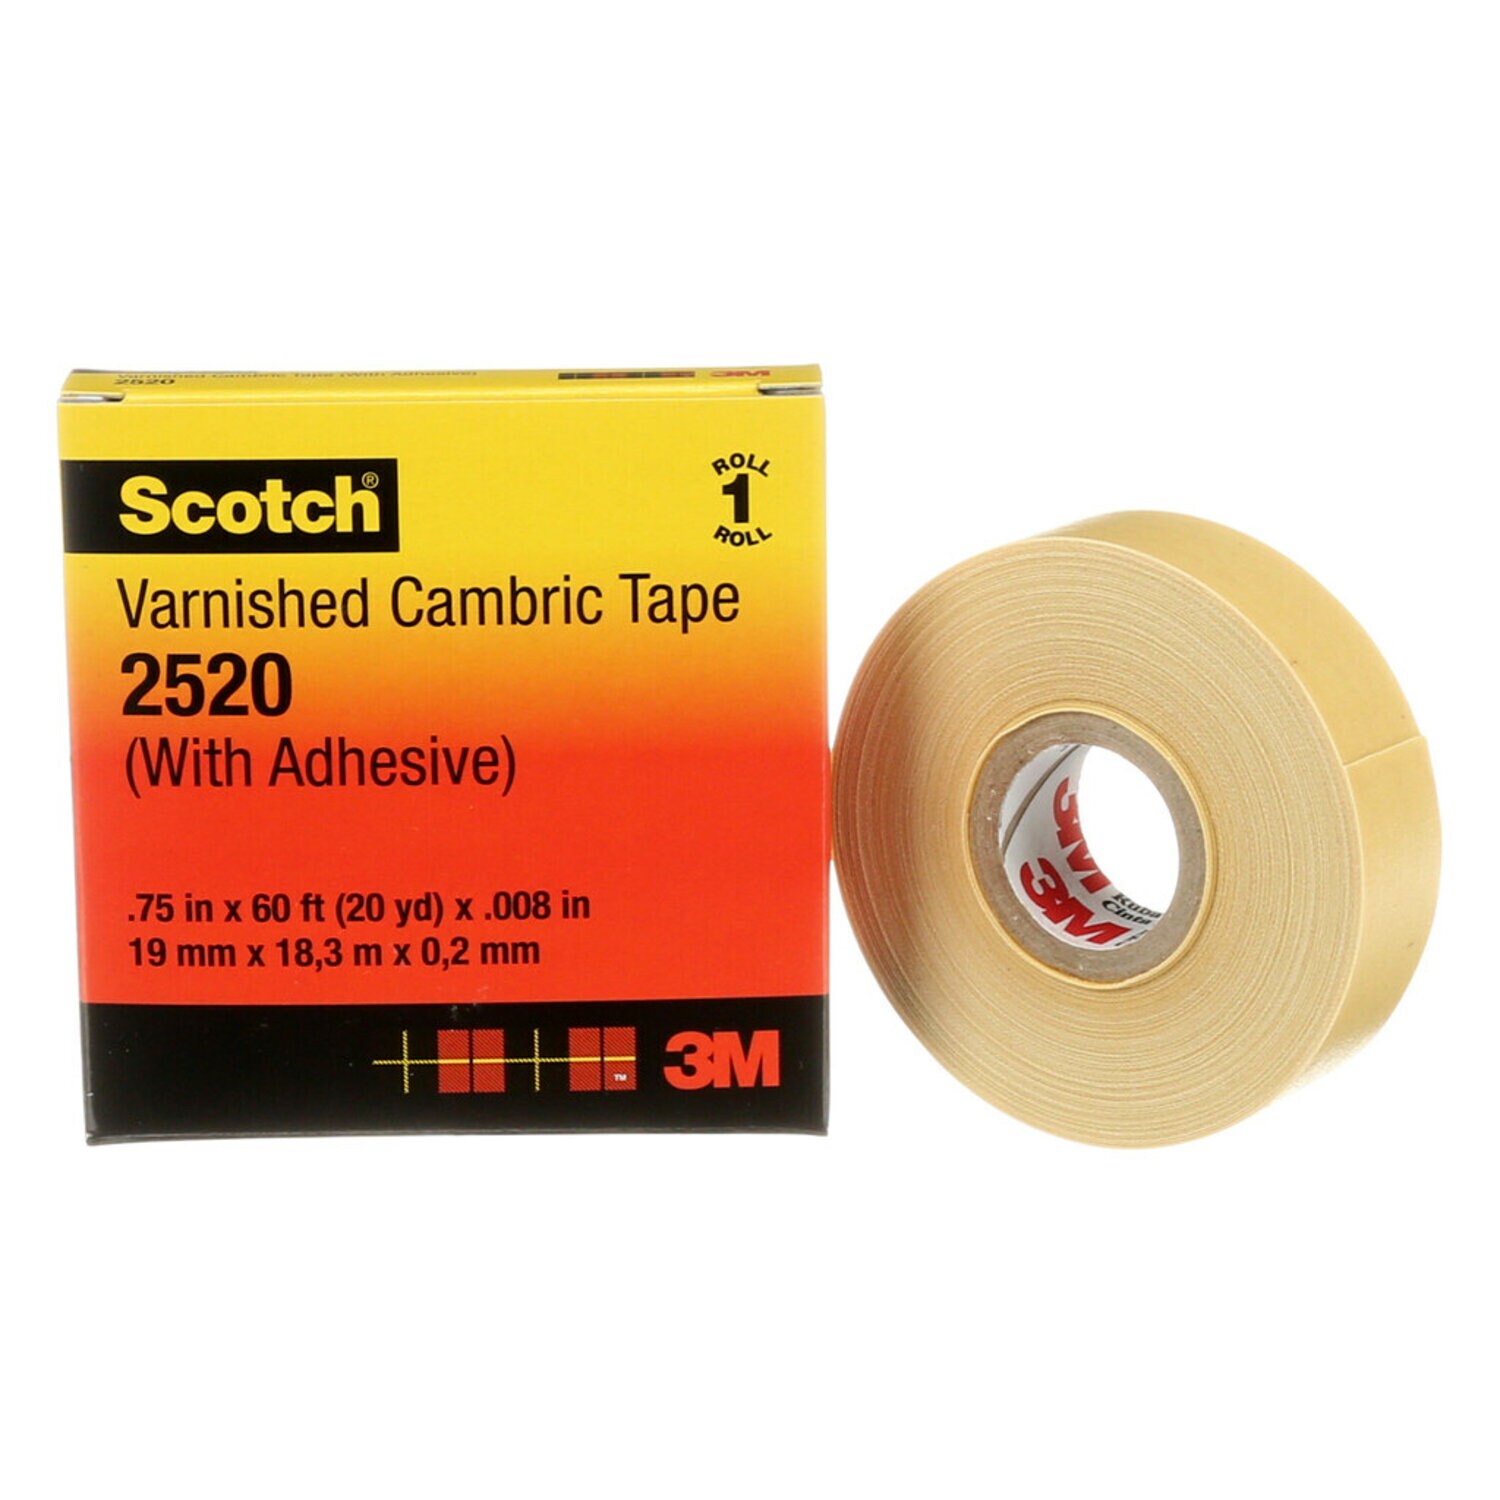 7000031629 - Scotch Varnished Cambric Tape 2520, 3/4 in x 60 ft, Yellow, 1
roll/carton, 20 rolls/Case